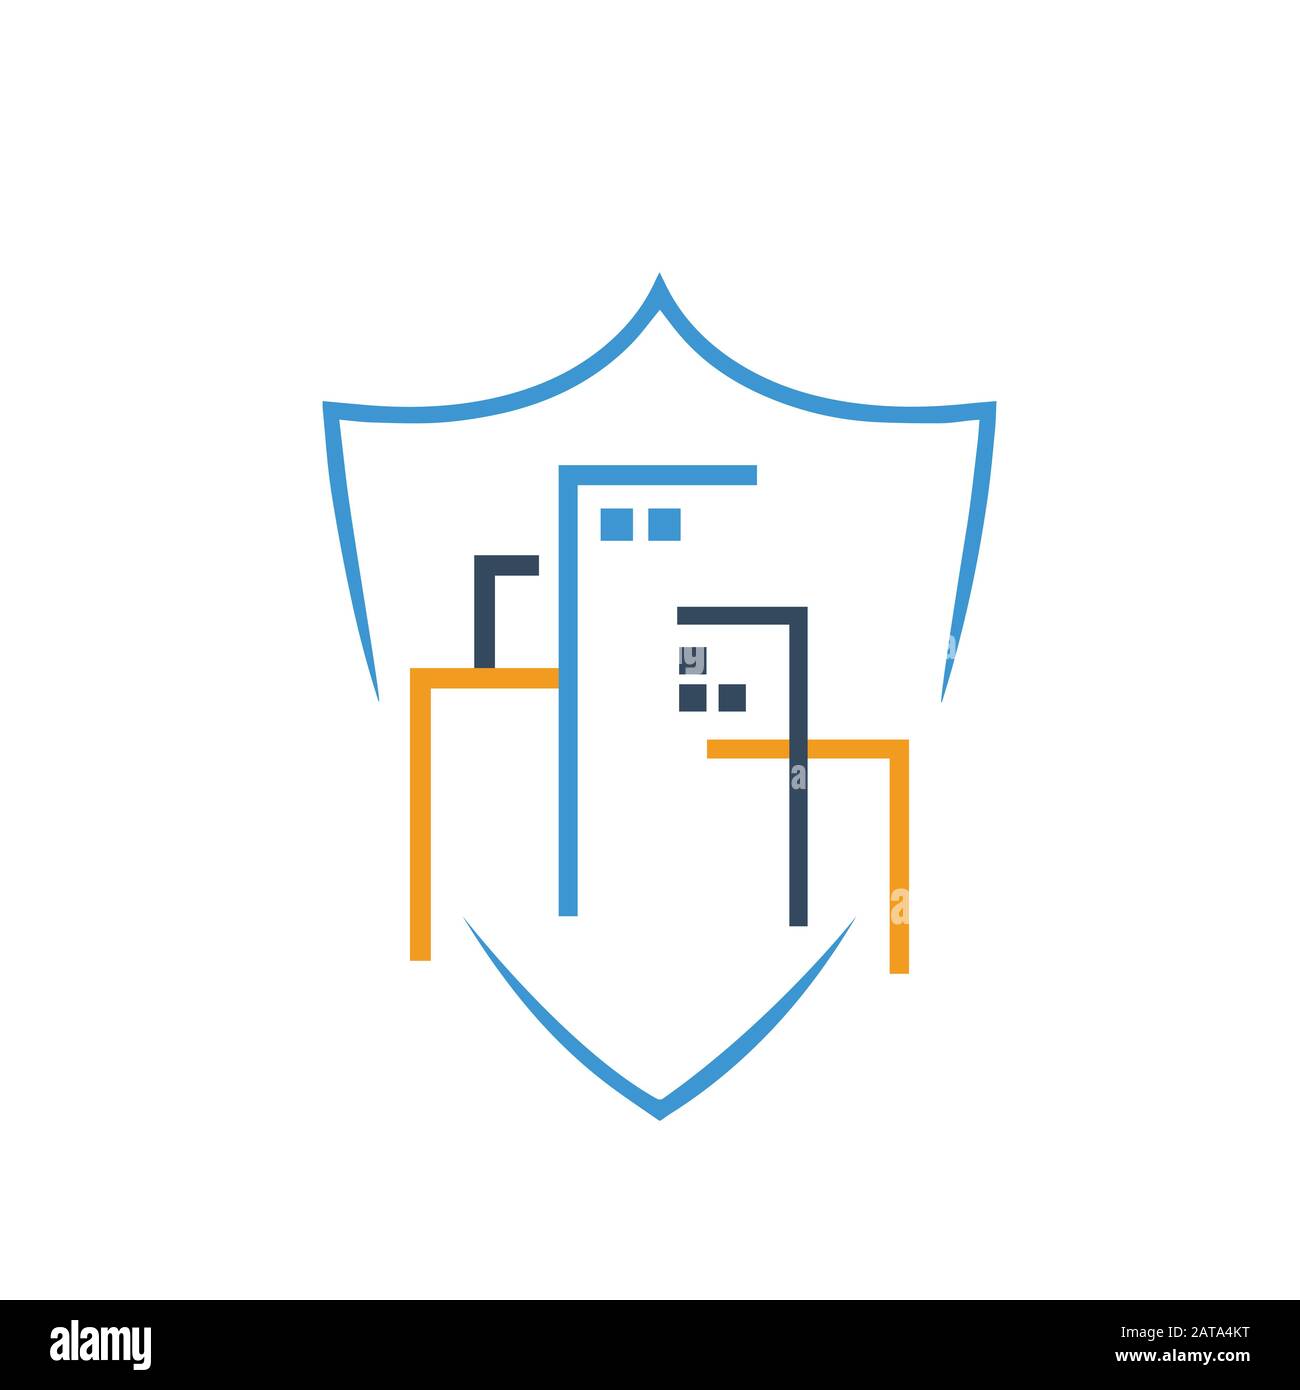 Abstract building security logo icon symbol of security protection company Stock Vector